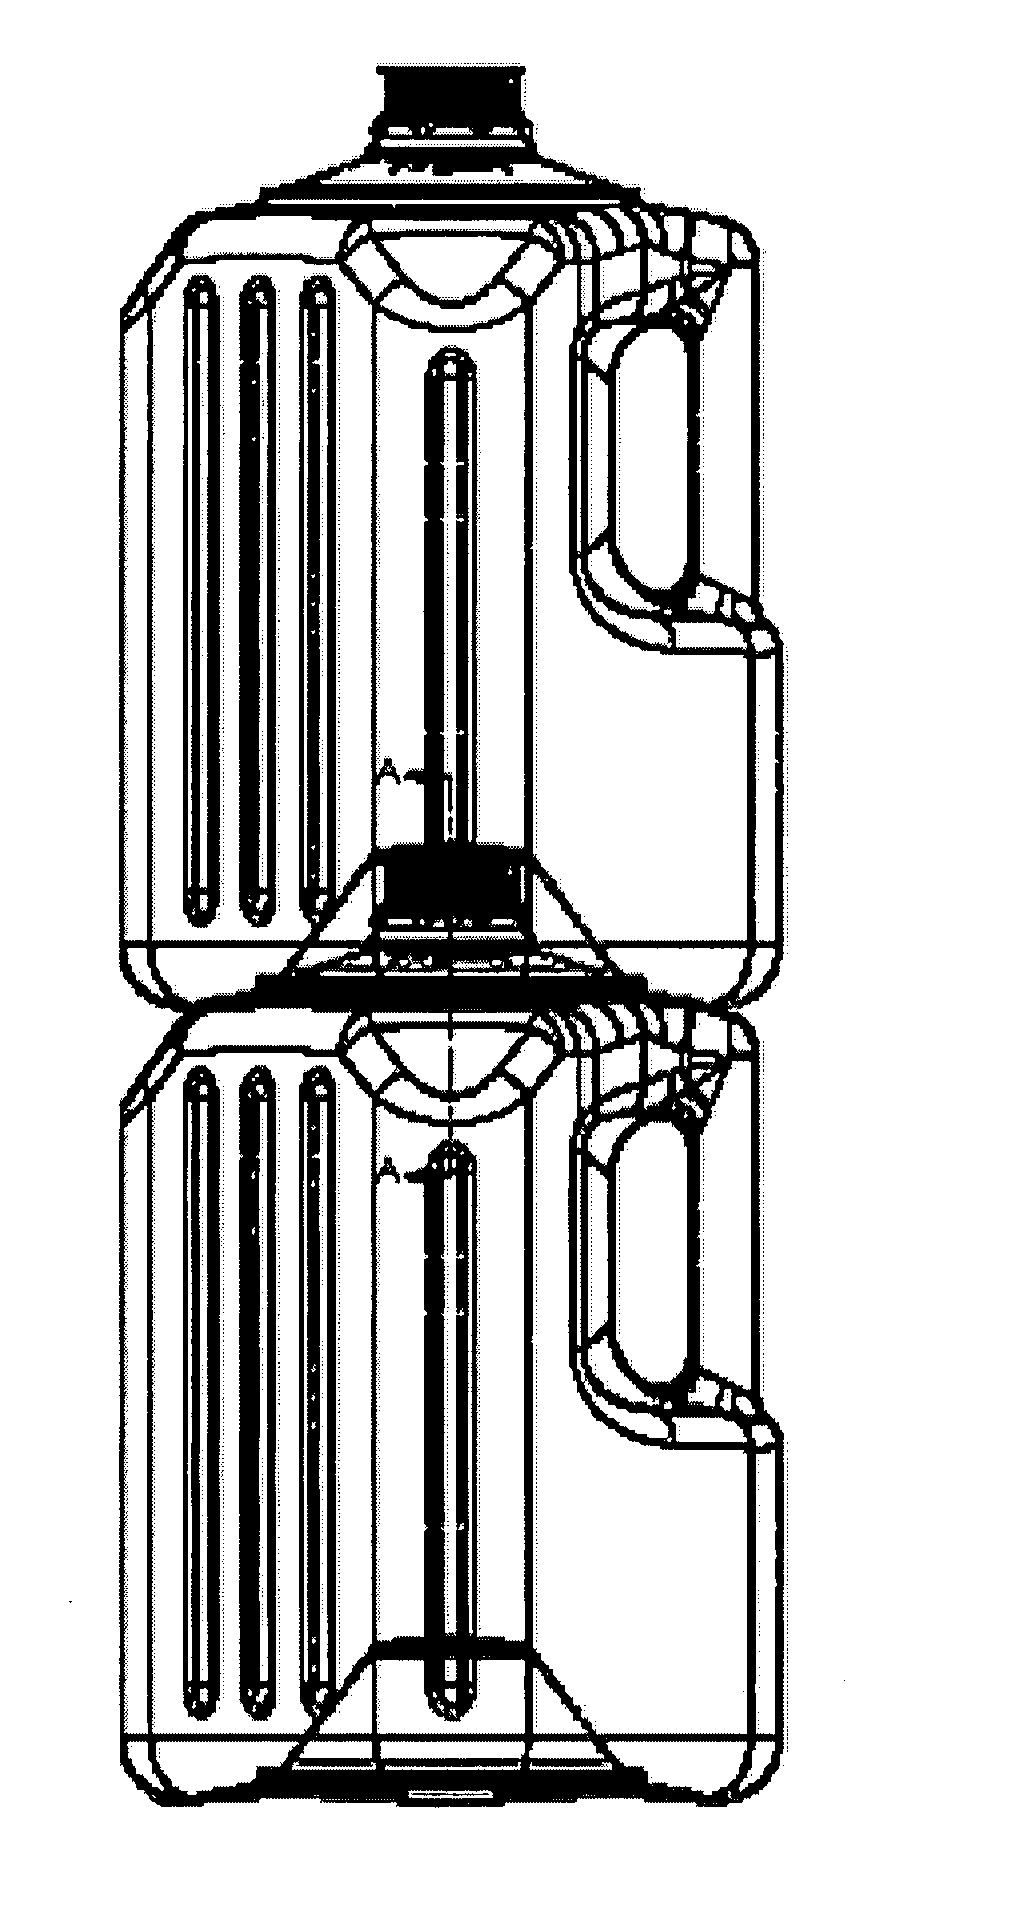 Stackable containers and methods of manufacturing, stacking, and shipping the same